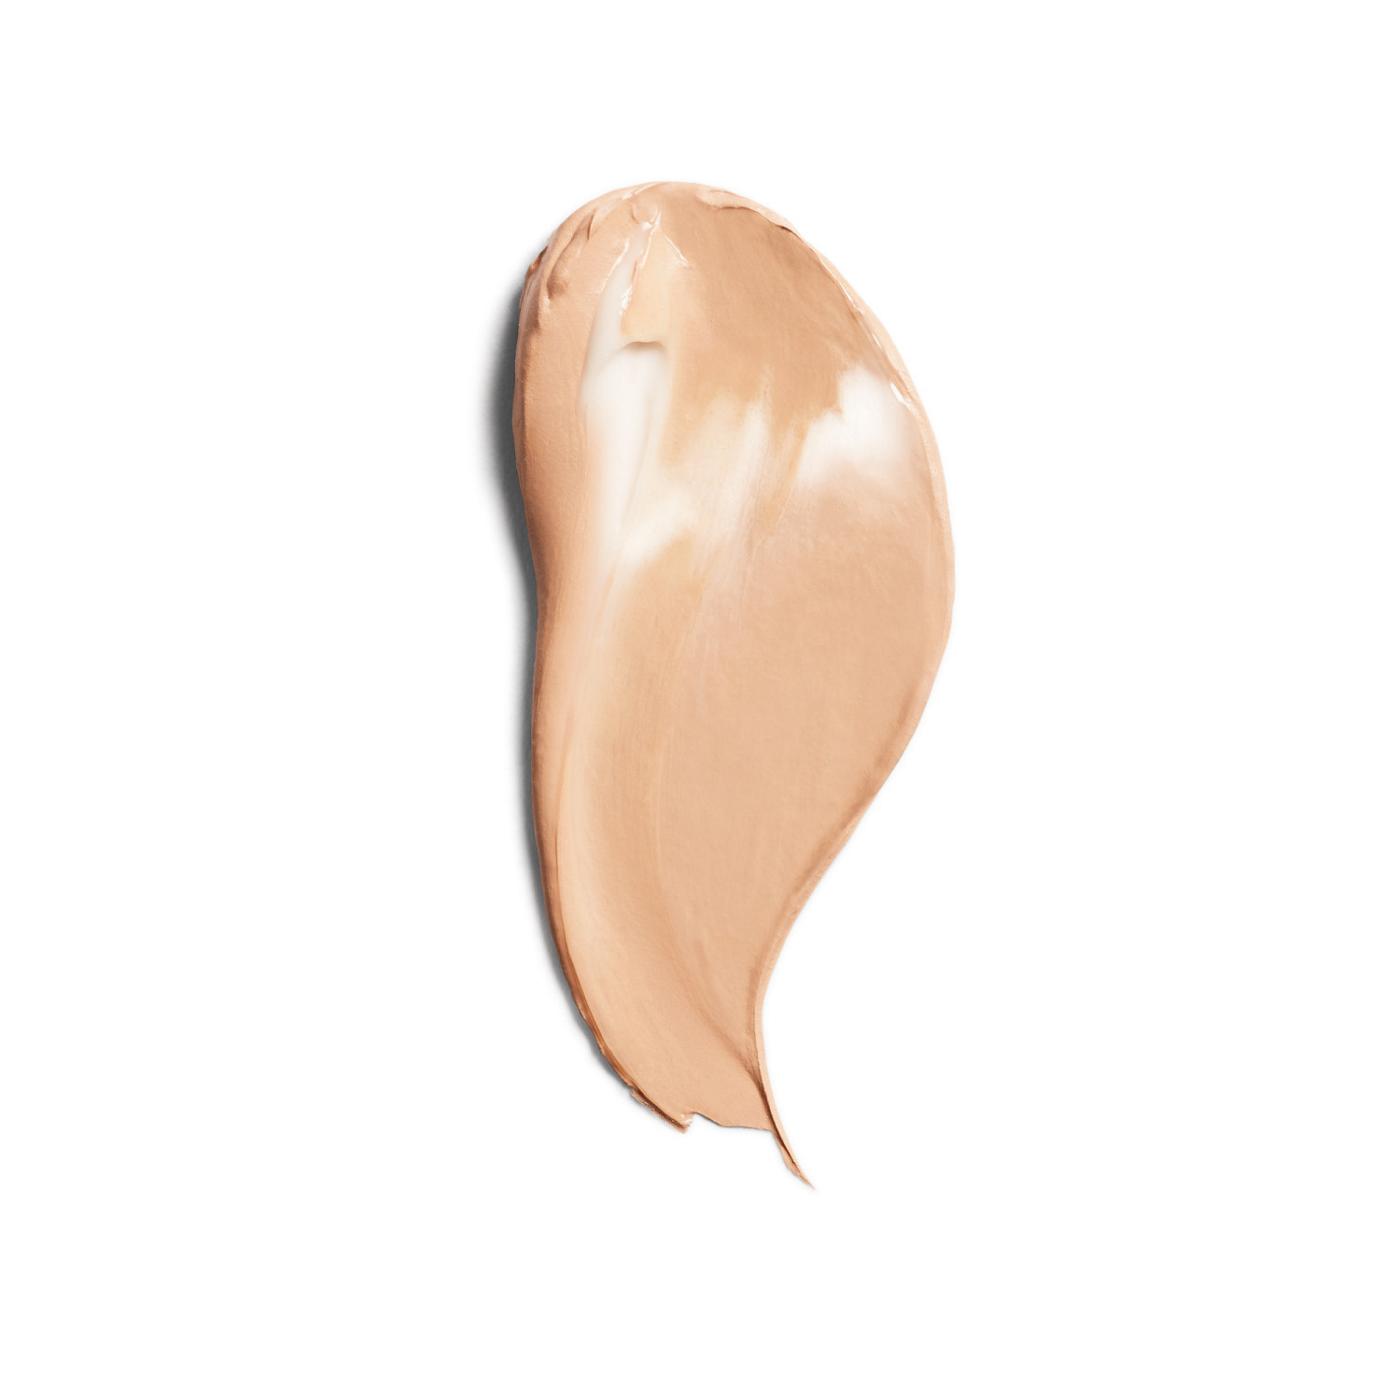 Covergirl Simply Ageless Wrinkle Defying Foundation 225 Buff Beige; image 3 of 8